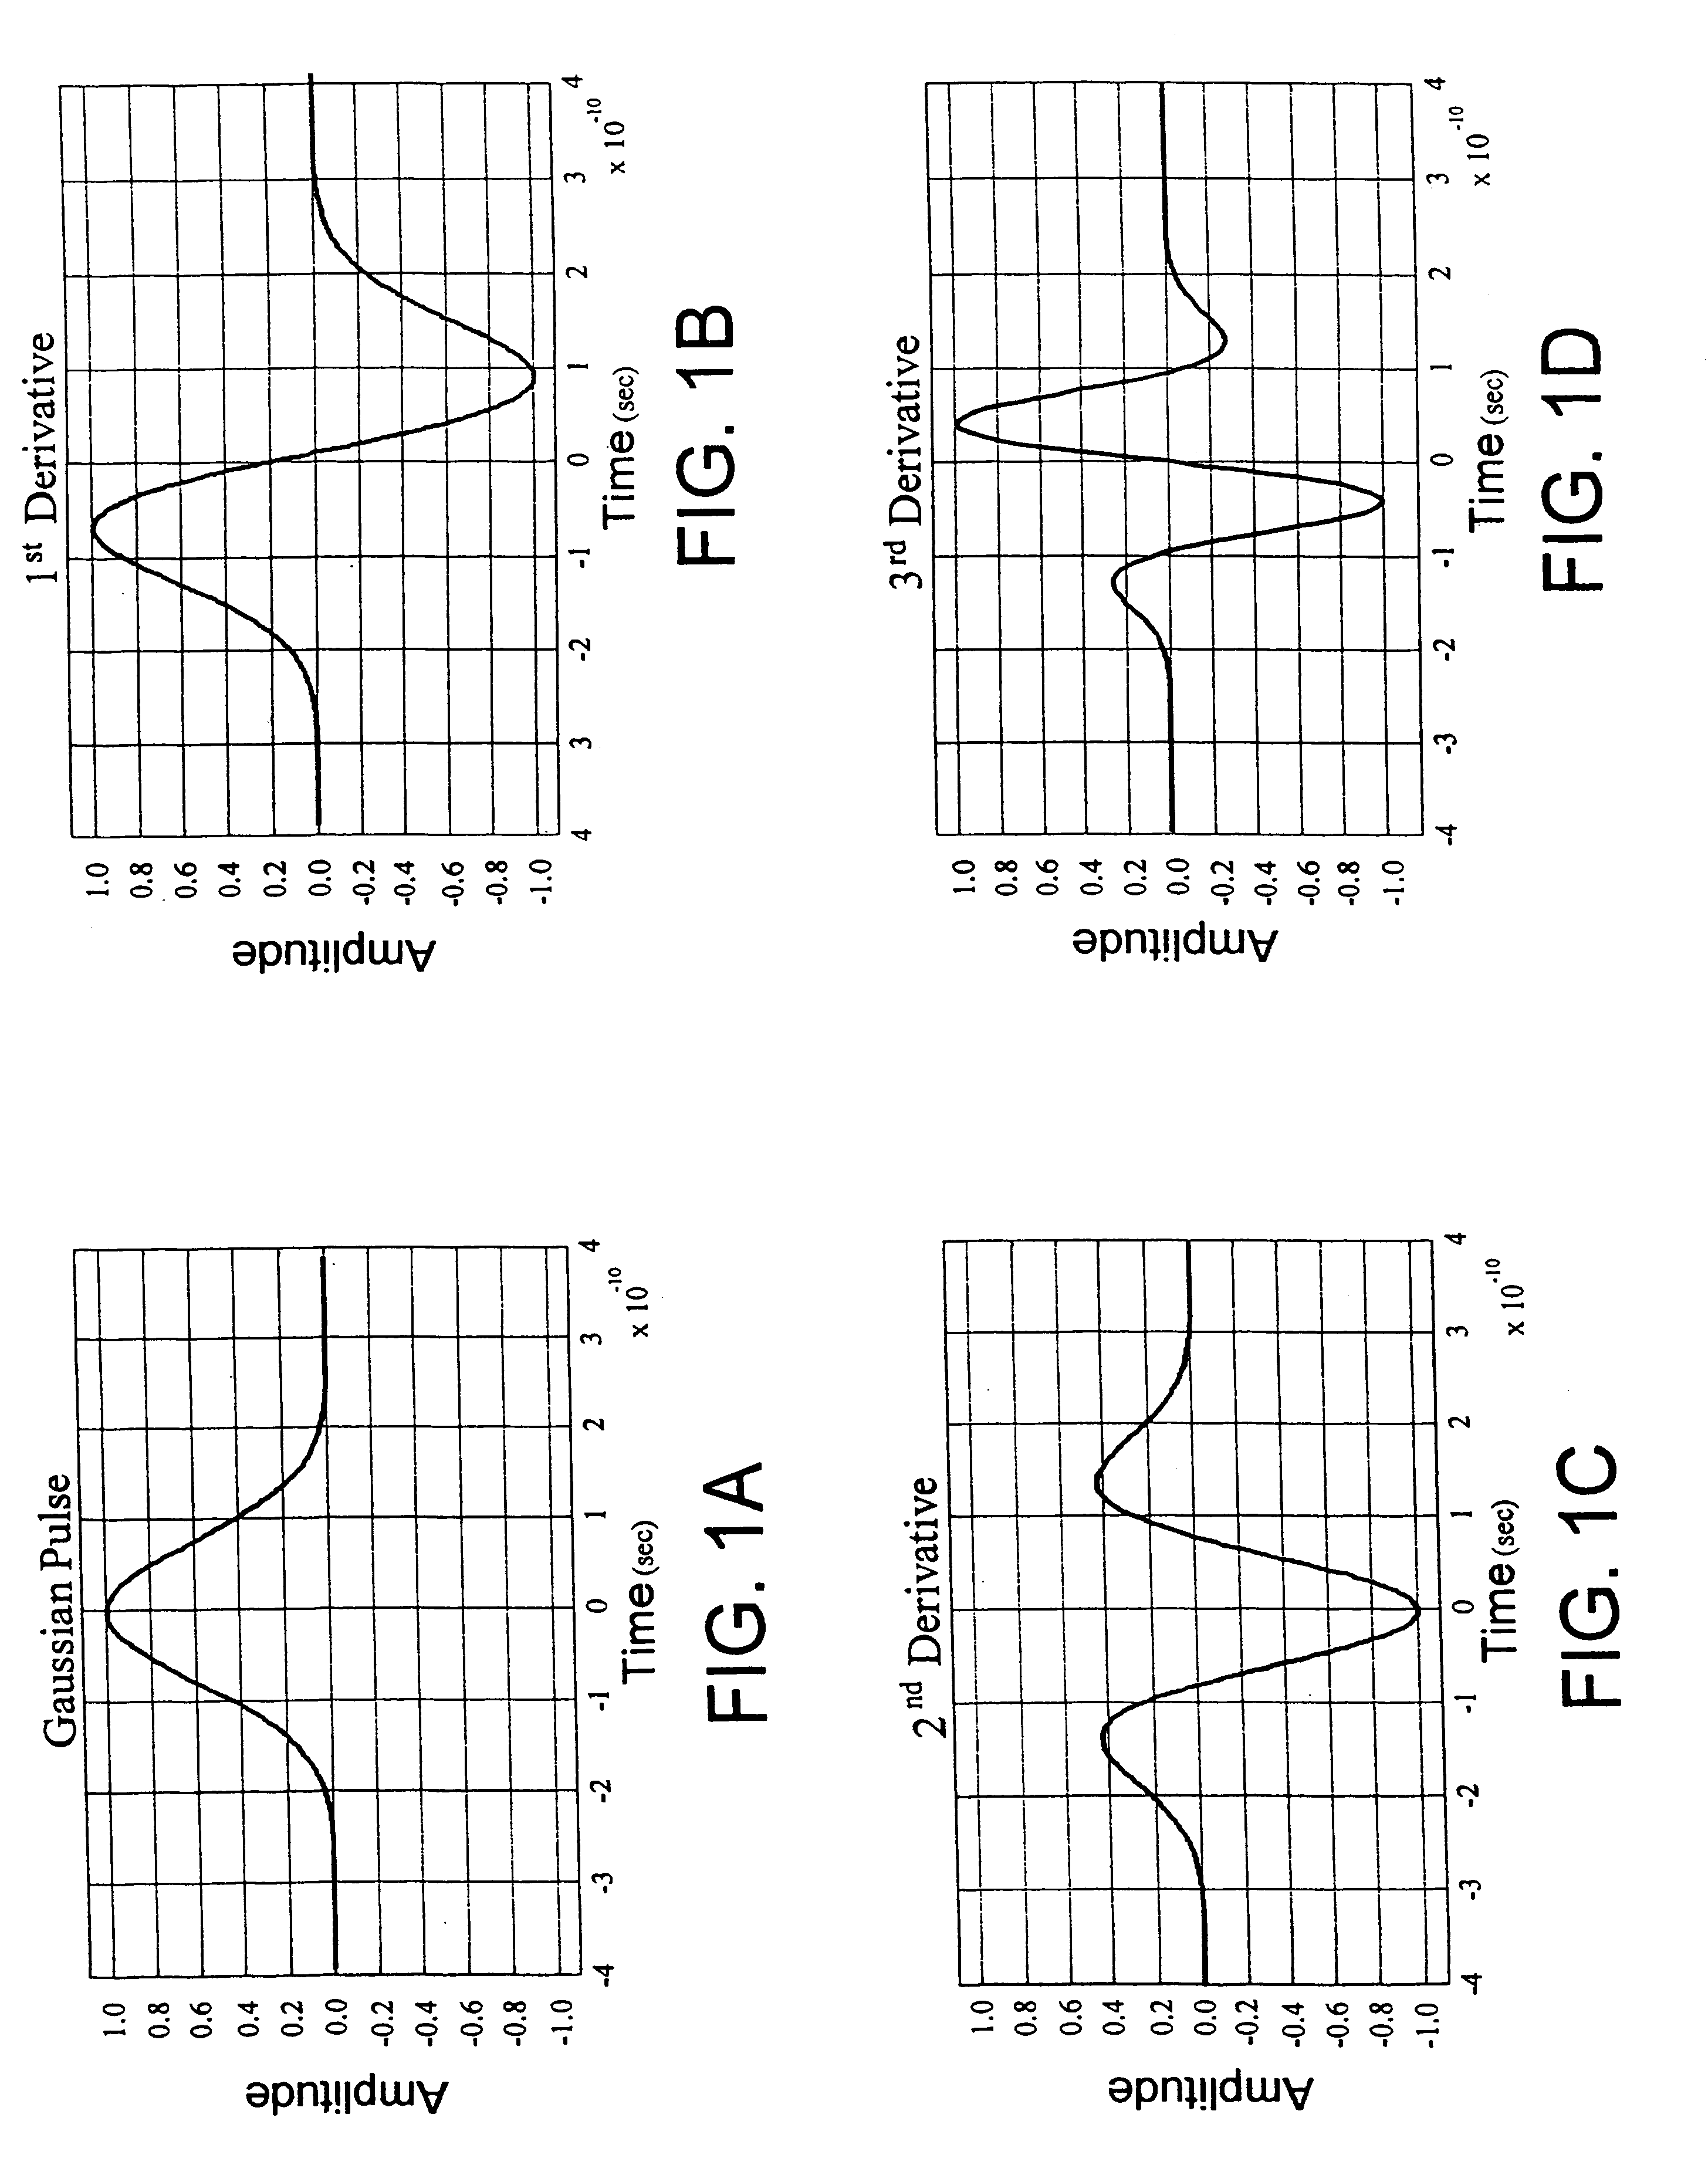 Railroad collision avoidance system and method for preventing train accidents